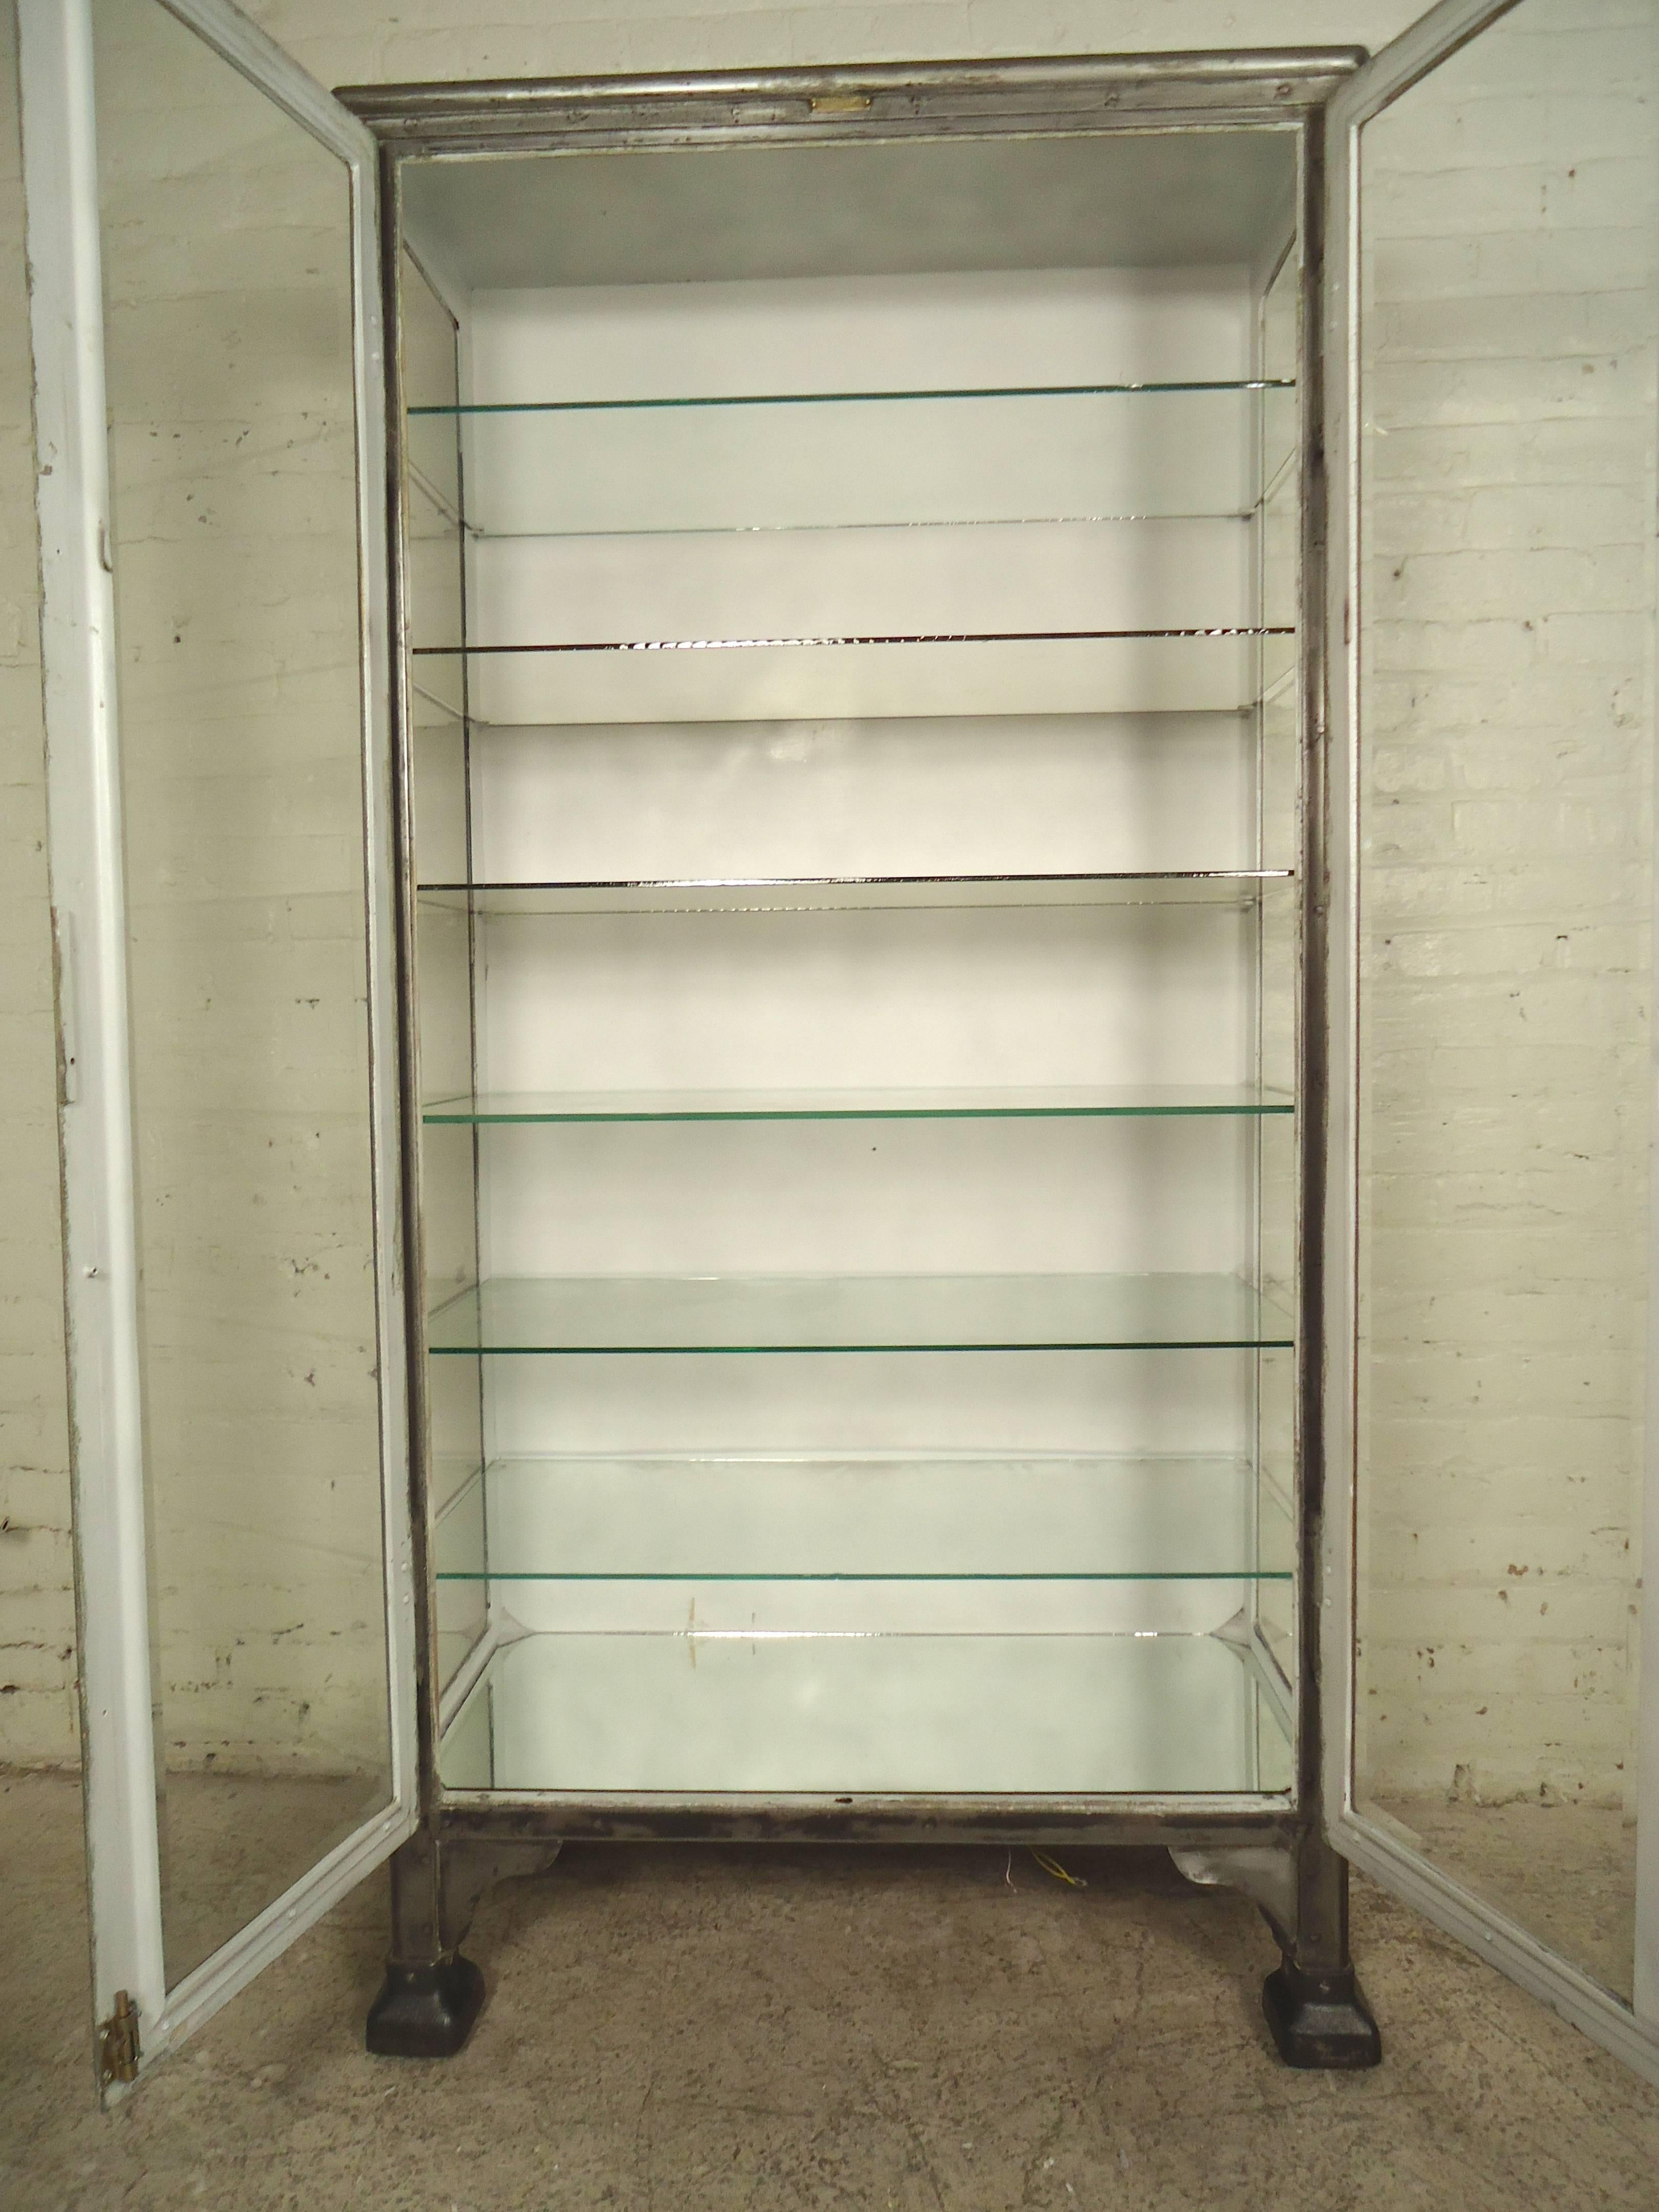 This restored metal cabinet has been stripped down and given a unique bare metal style finish. Complete with mirrored bottom, six thick removable glass shelves, locking mechanisms, and rolling casters.
This is a heavy unit that features three glass